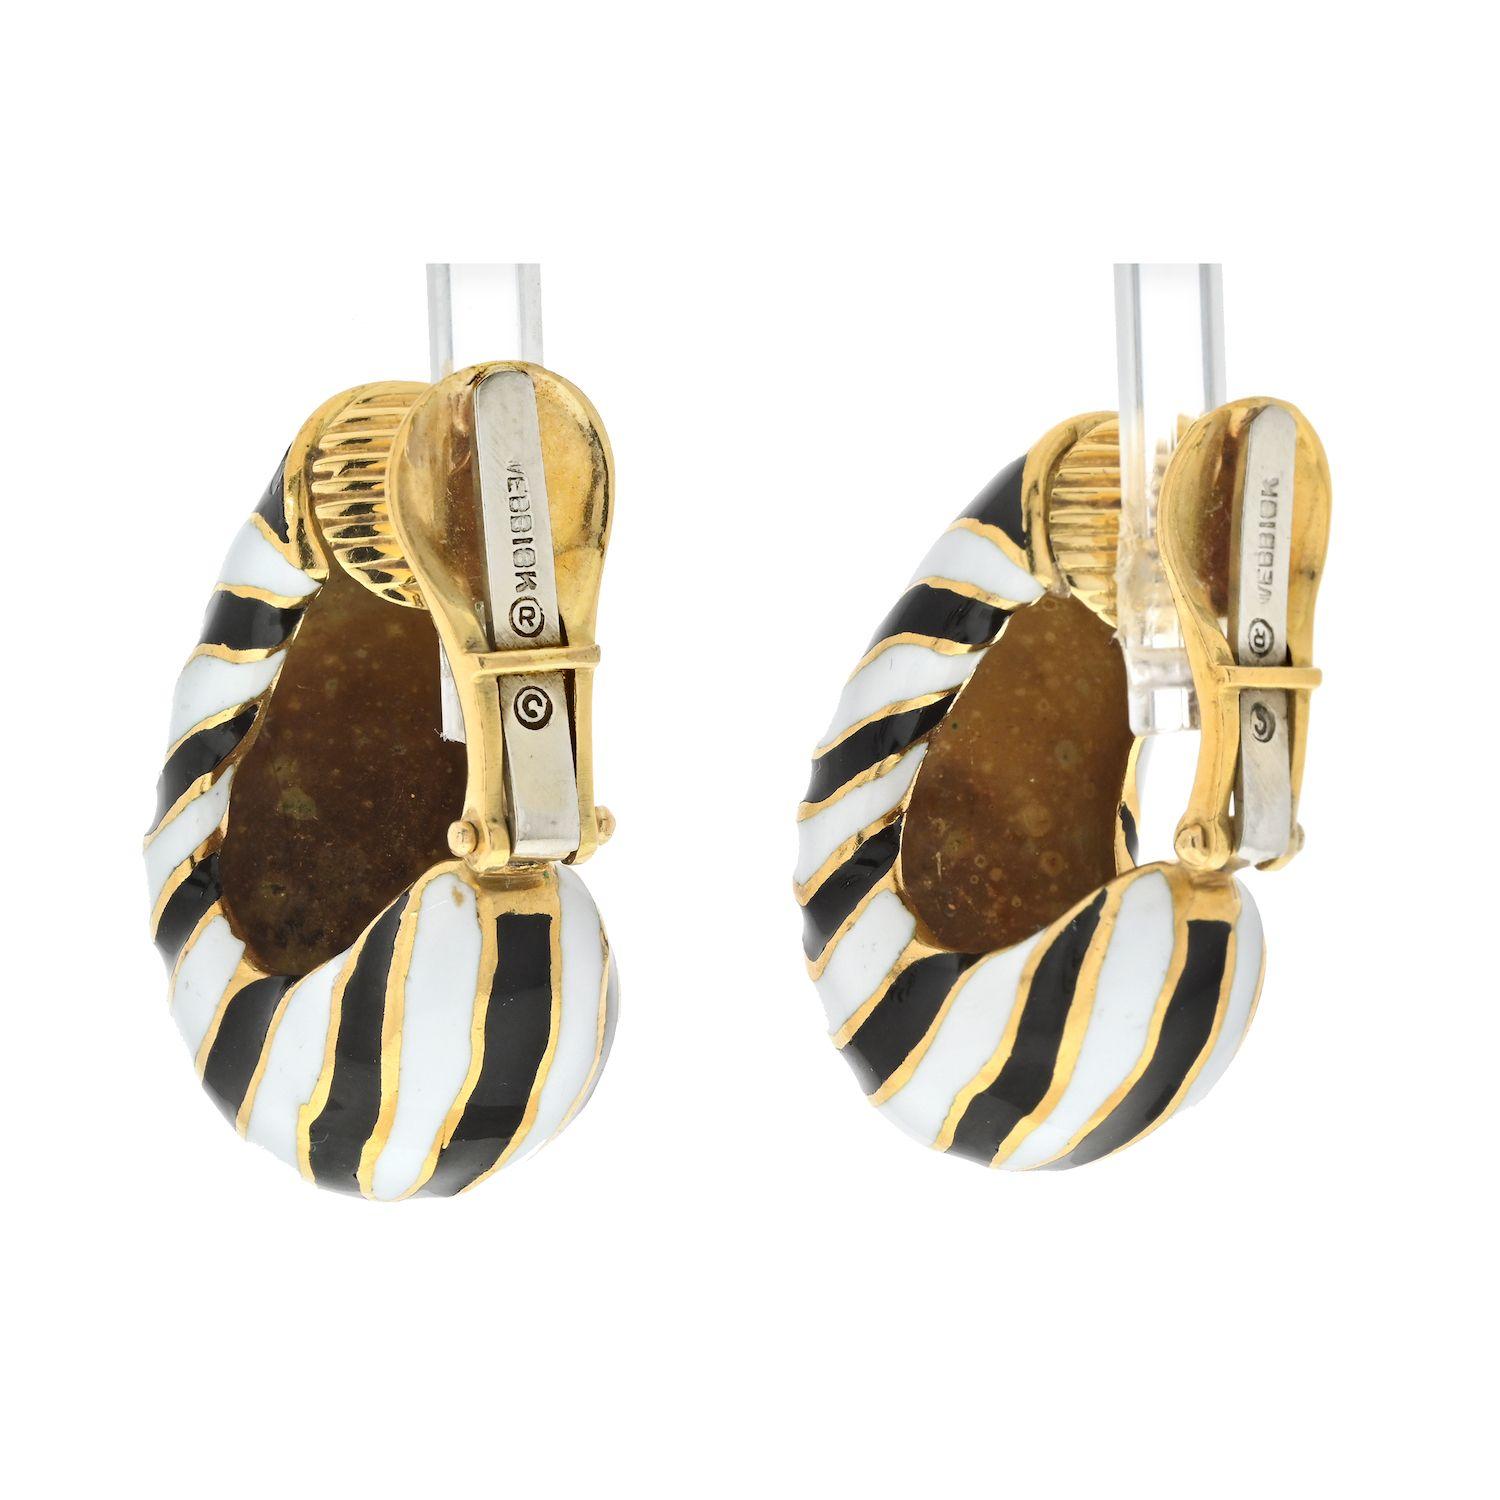 A stunning pair of earrings that exude timeless elegance and artistic flair by David Webb. The Platinum & 18K Yellow Gold Classic Zebra Black And White Stripe Enamel Earrings are a striking blend of sophistication and playfulness. Crafted with